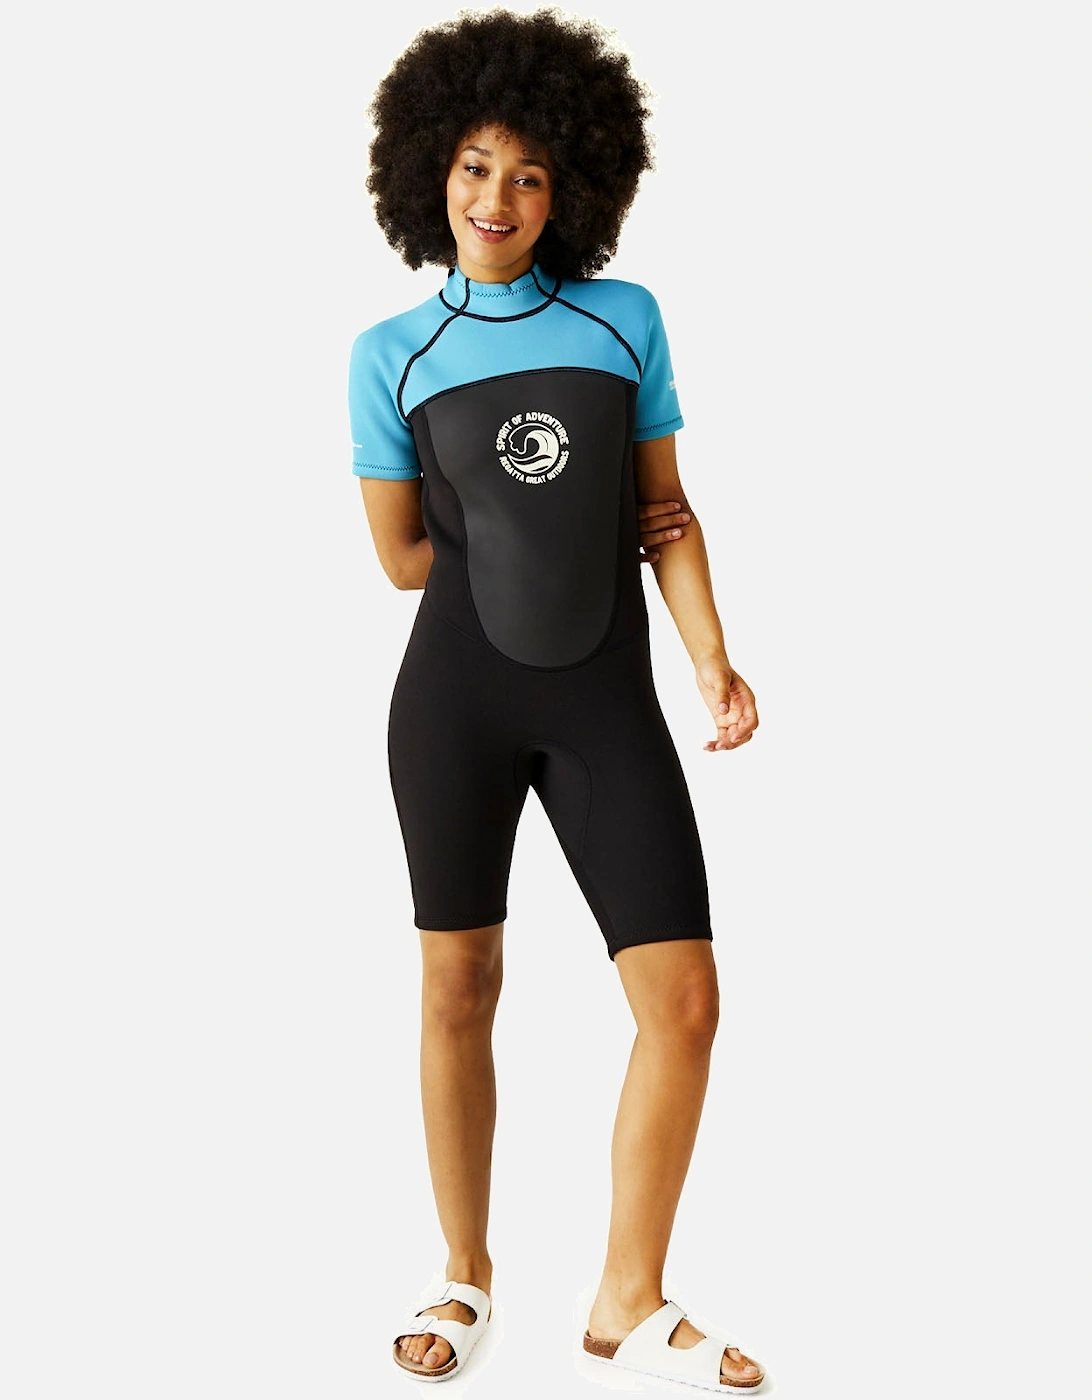 Womens Shorty Surfing Back Zip Wetsuit